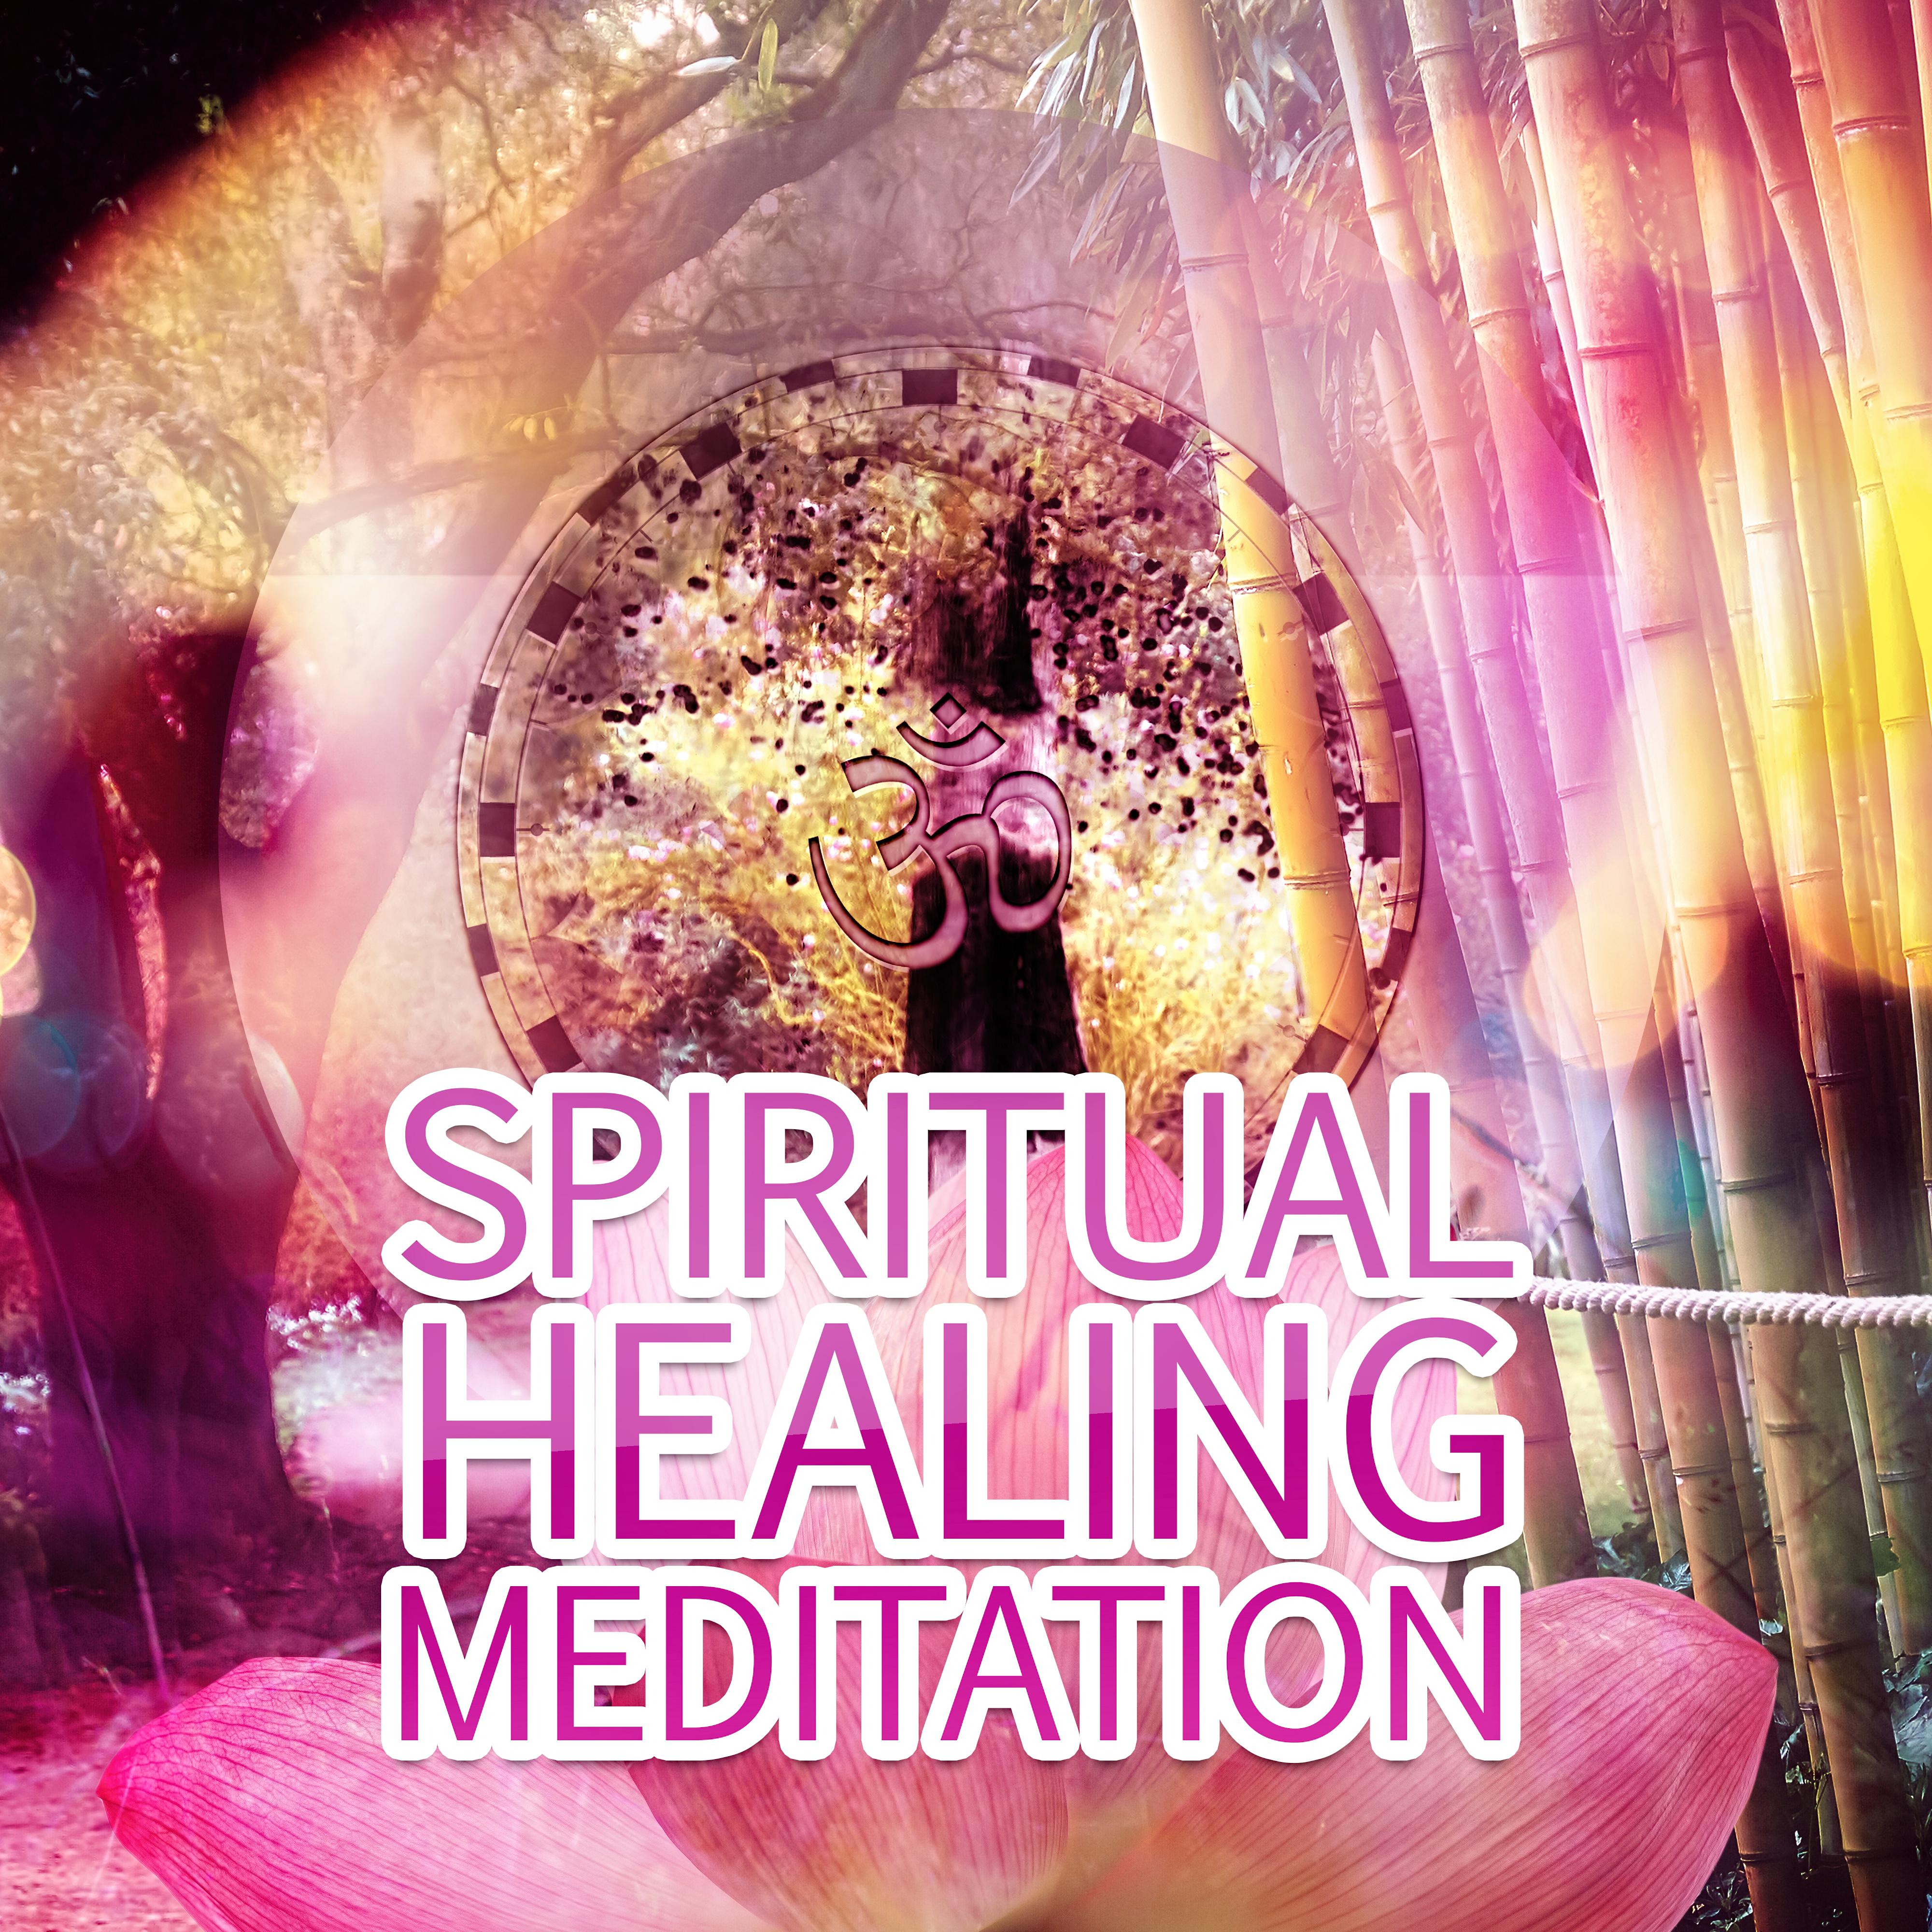 Spiritual Healing Meditation - Sound Healing for Relaxation Therapy, Self Development and Health, Spa, Yoga, Sleep, White Noise for Reduce Stress